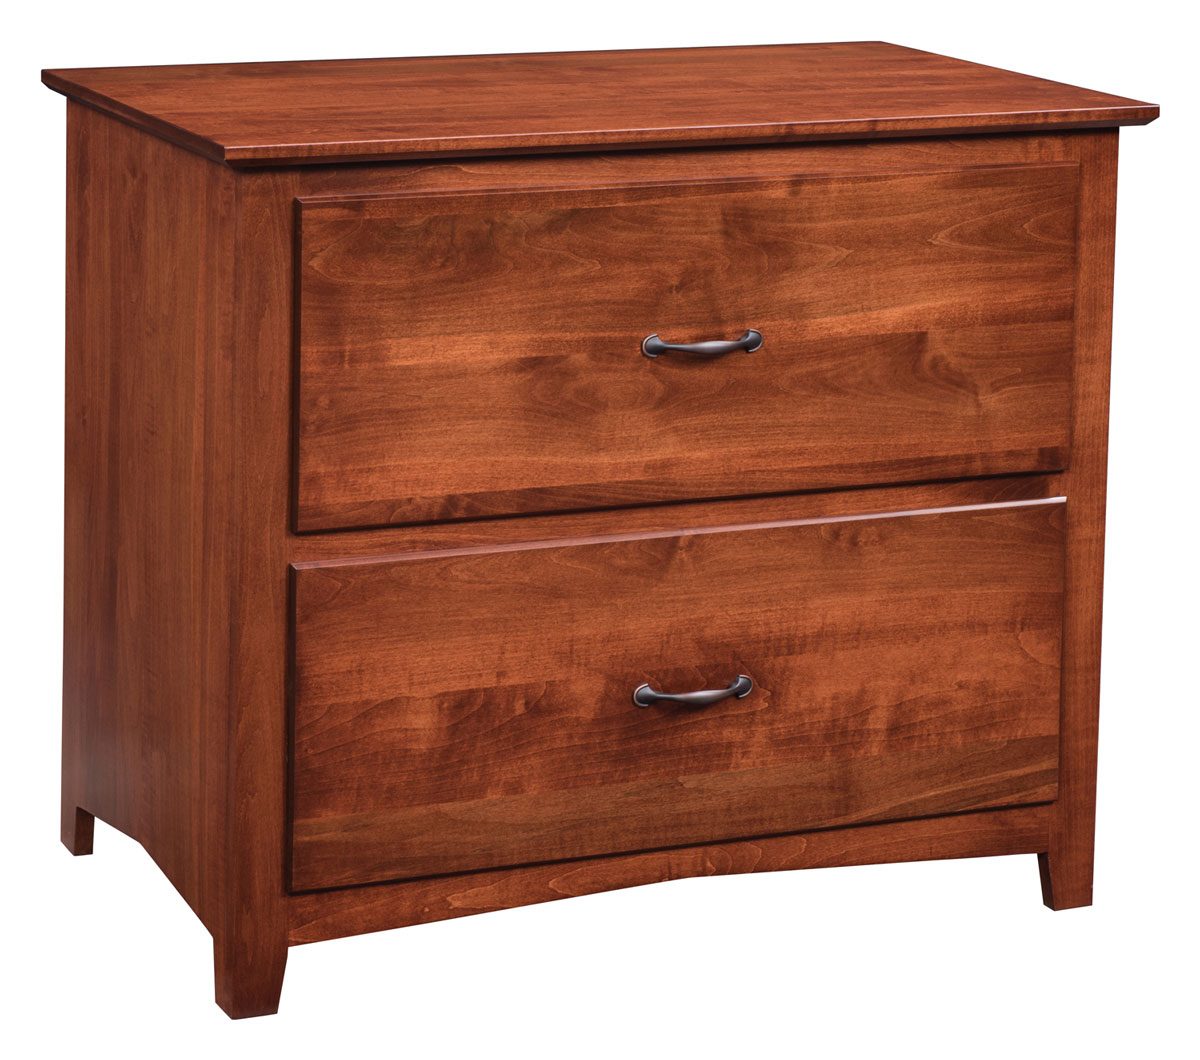 Linwood 2 Drawer Lateral File Cabinet shown in Brown Maple with OCS-225 Mission Maple Stain and #41 pulls.